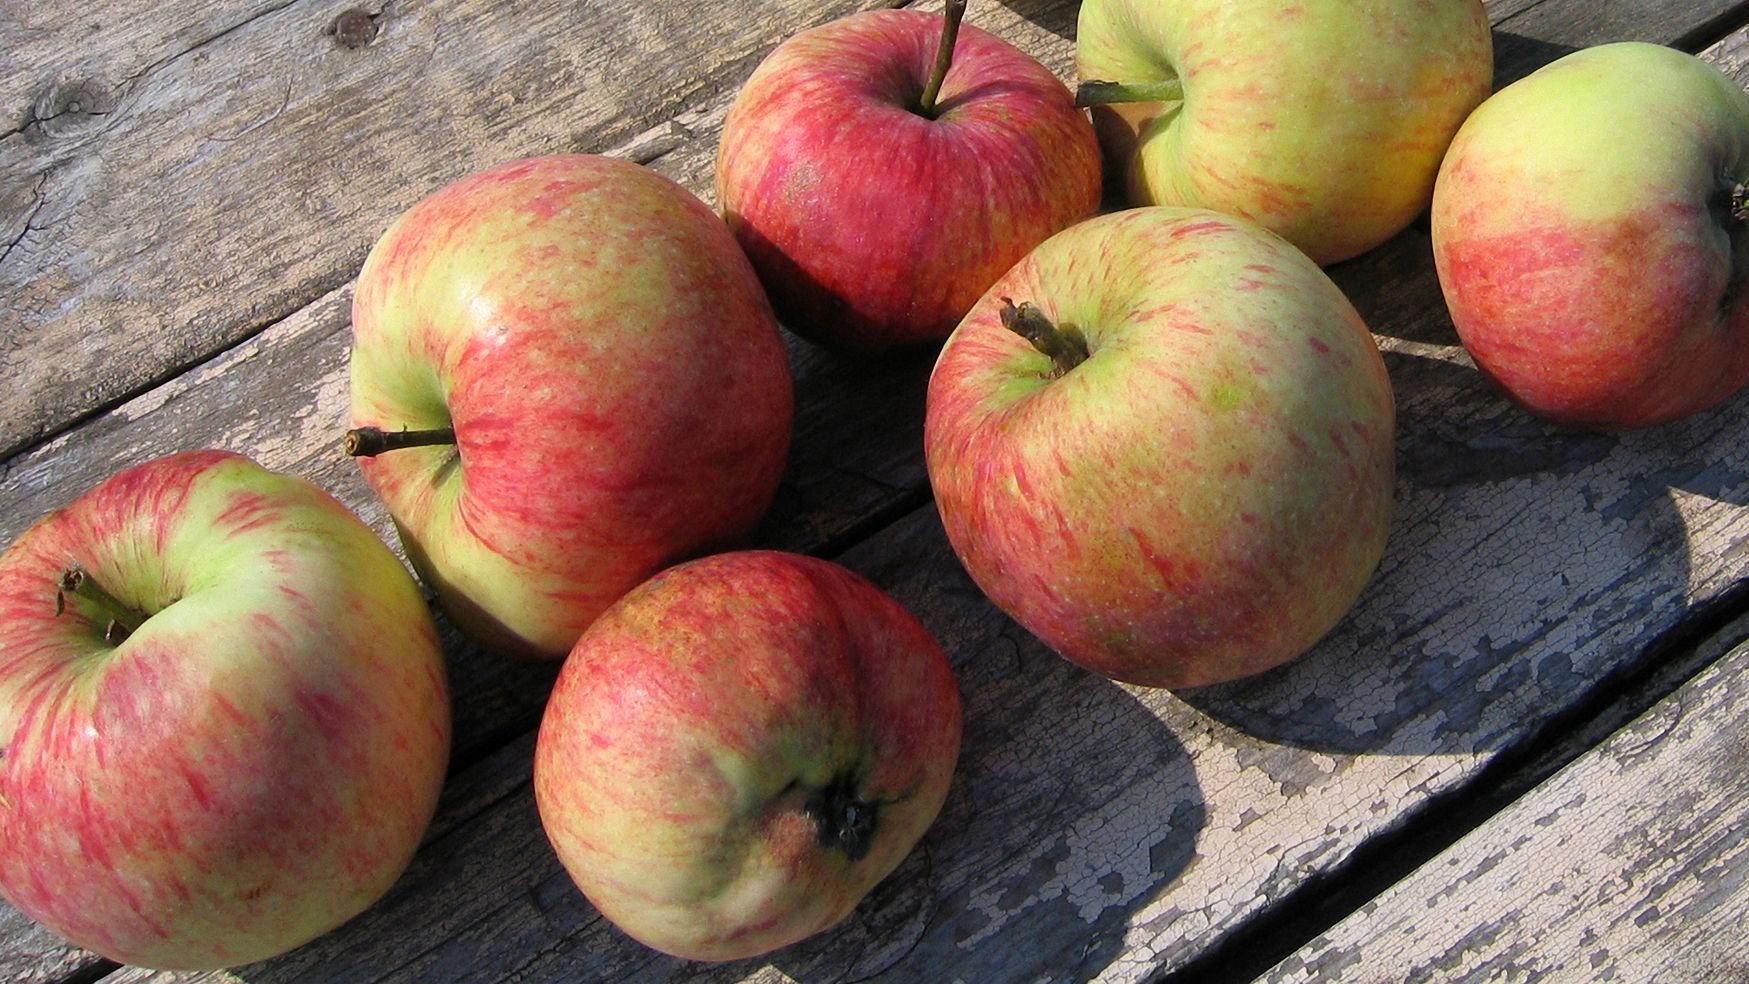 Fall means crisp apples in New England